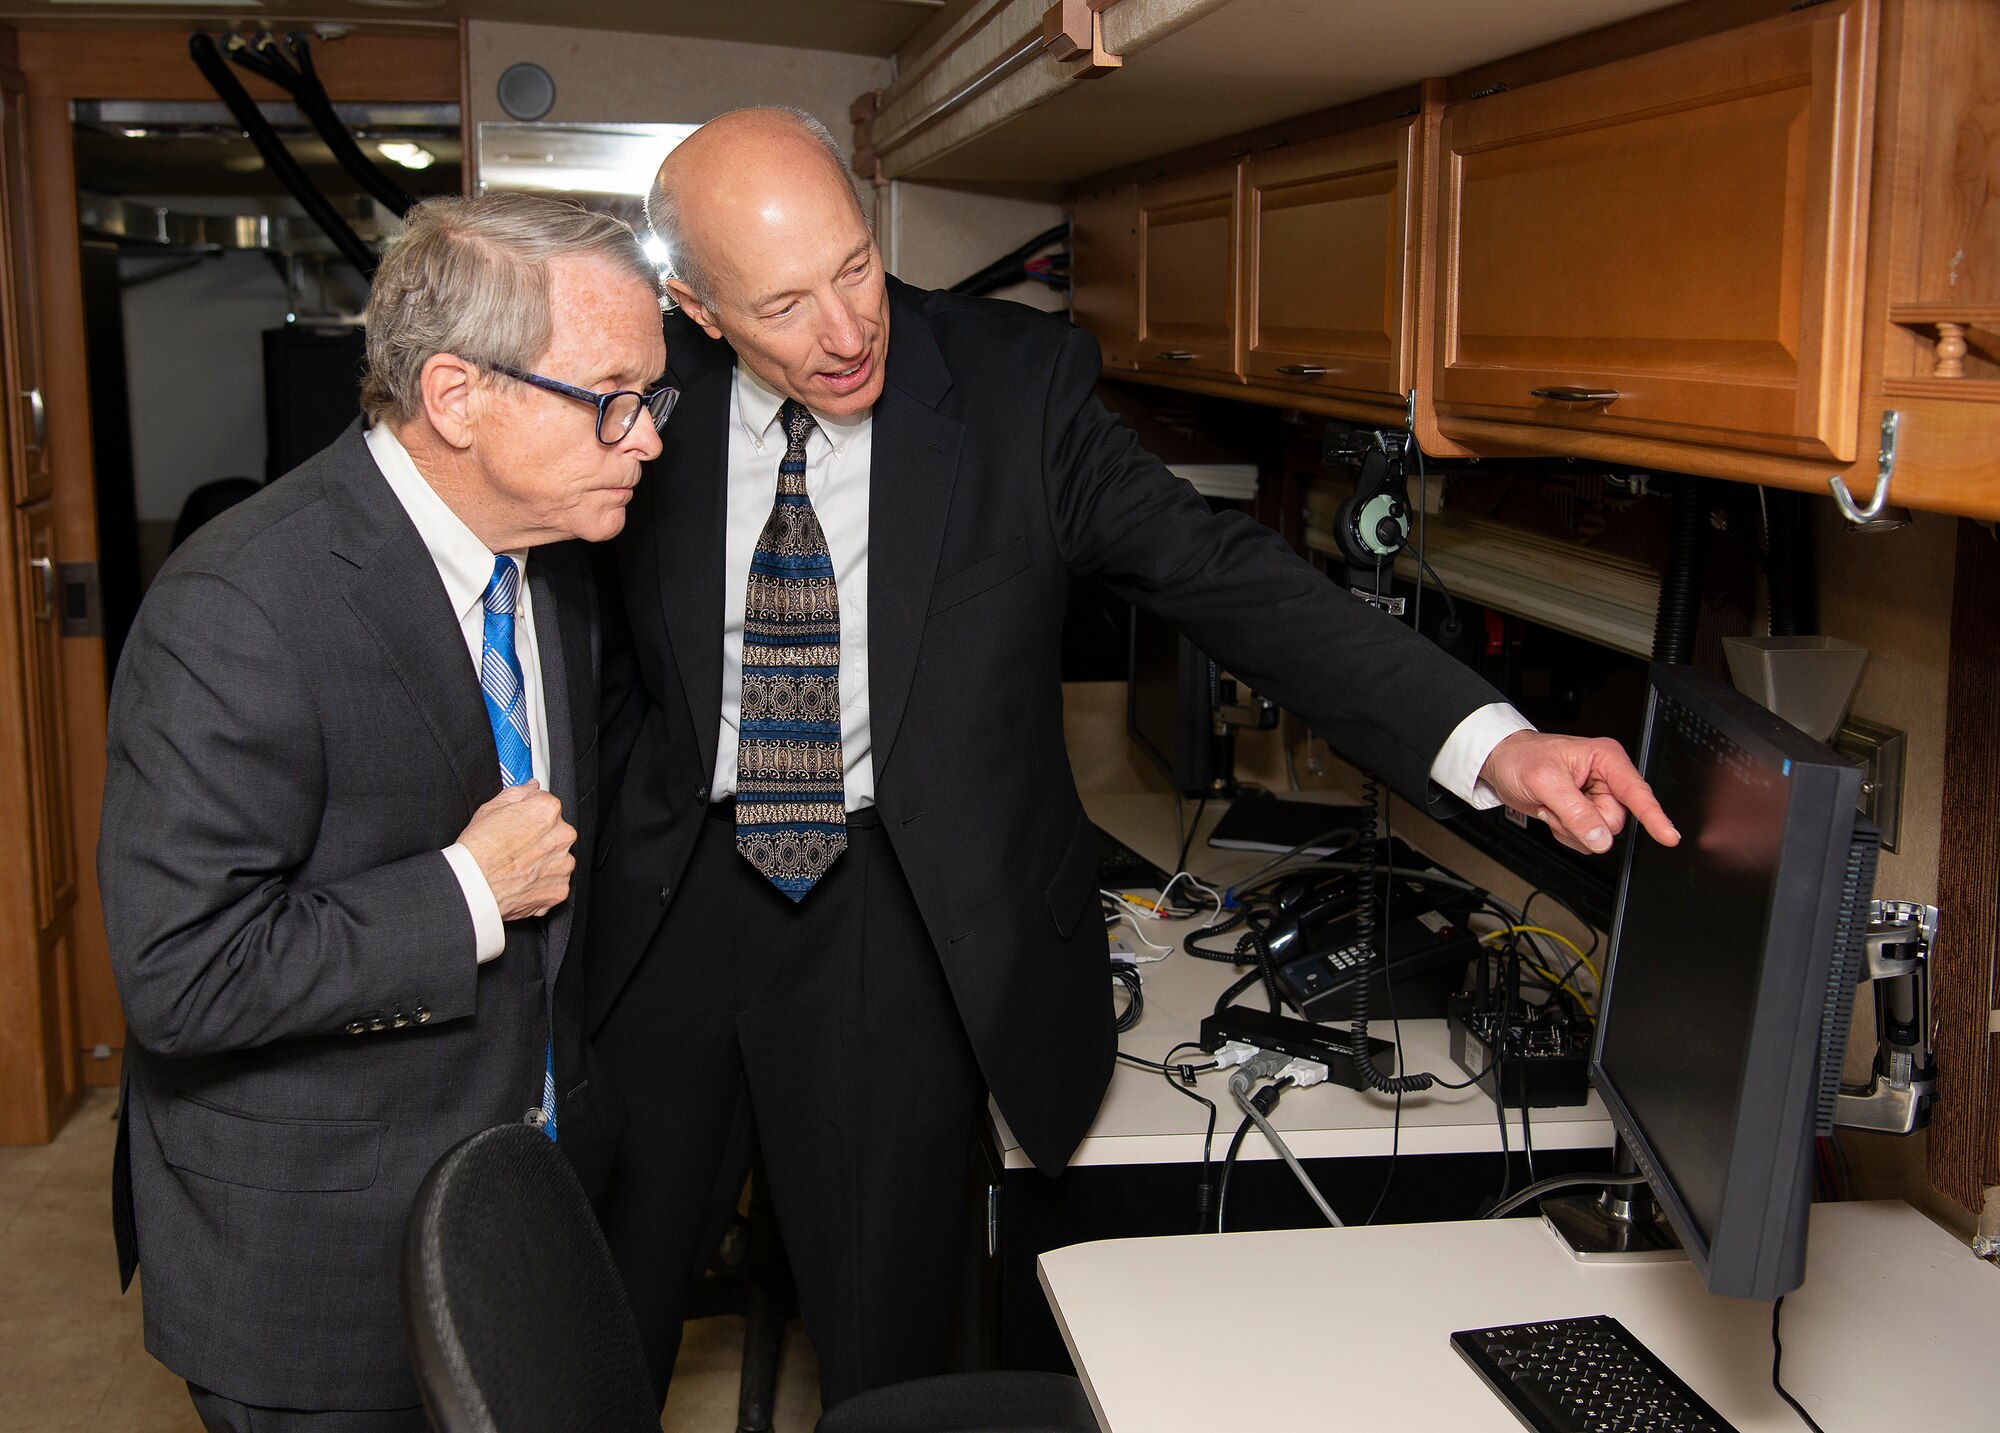 Arthur Huber, Air Force Research Laboratory deputy director of operations, shows Ohio Gov. Mike DeWine one of the monitors in the SkyVision recreational vehicle April 19, 2019 in a facility on the Springfield-Beckley Municipal Airport. DeWine was taking part in an announcement that the Federal Aviation Administration has granted a Certificate of Waiver or Authorization to the Air Force Research Laboratory for beyond visual line of sight flights of unmanned aerial systems. The system has been modified to be able to fit on a mobile platform. (U.S. Air Force photo by R.J. Oriez)